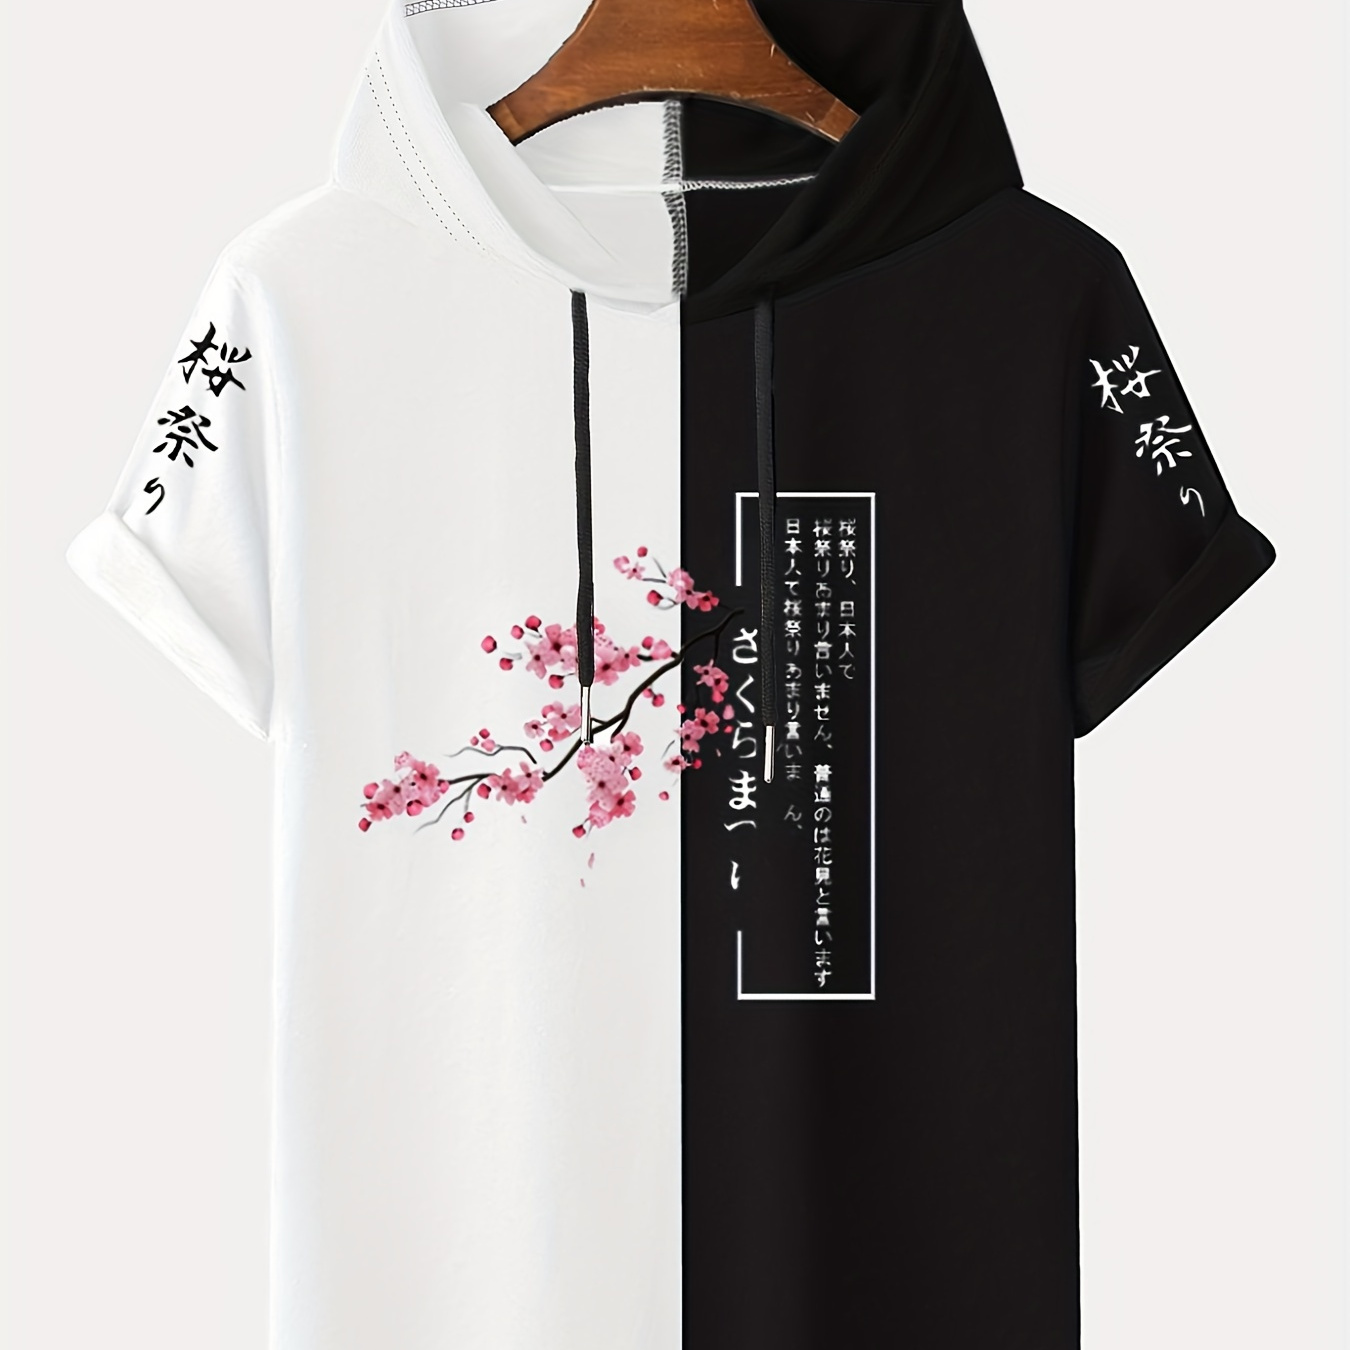 

Color Block Men's Hooded Short Sleeve T-shirt With Drawstring And Sakura Graphic Design, Men's Pullover Tops For Summer